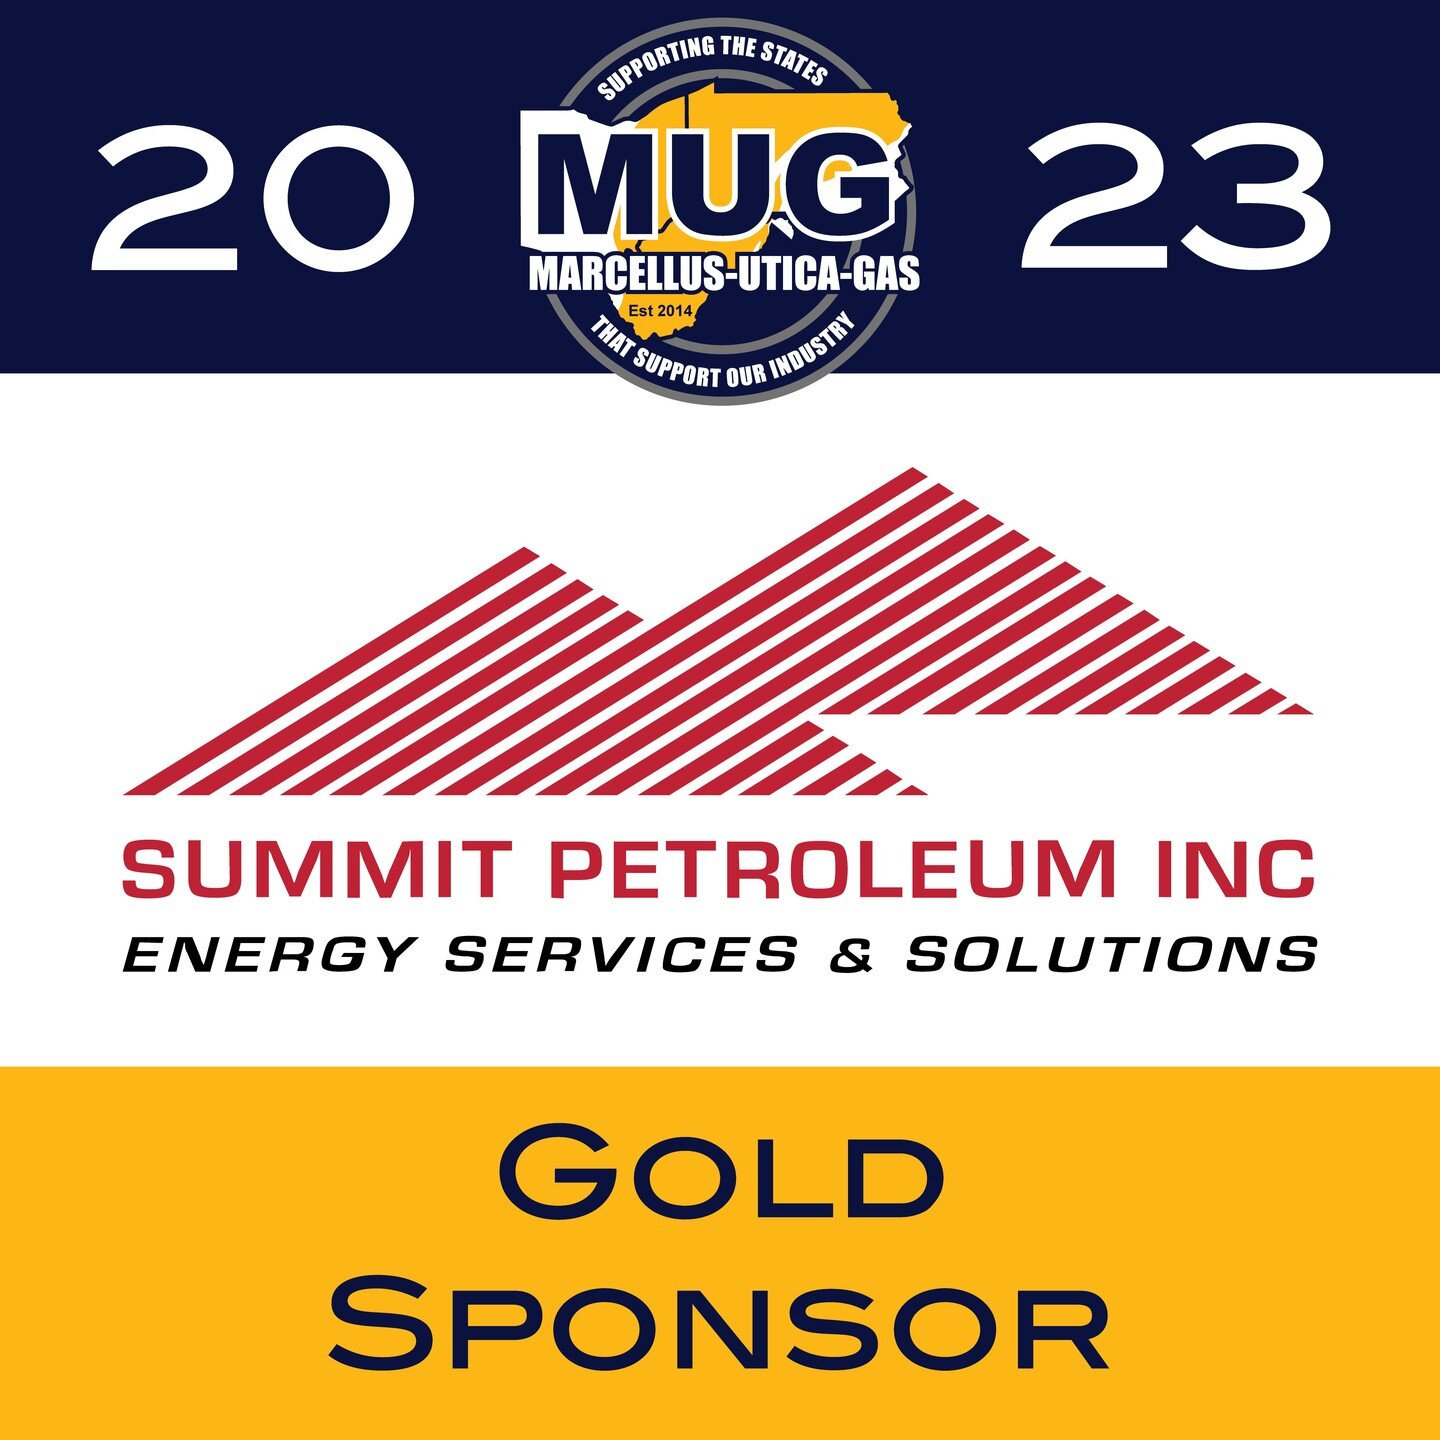 Thank you to our Gold Sponsor, Summit Petroleum Inc., for your support in 2023!